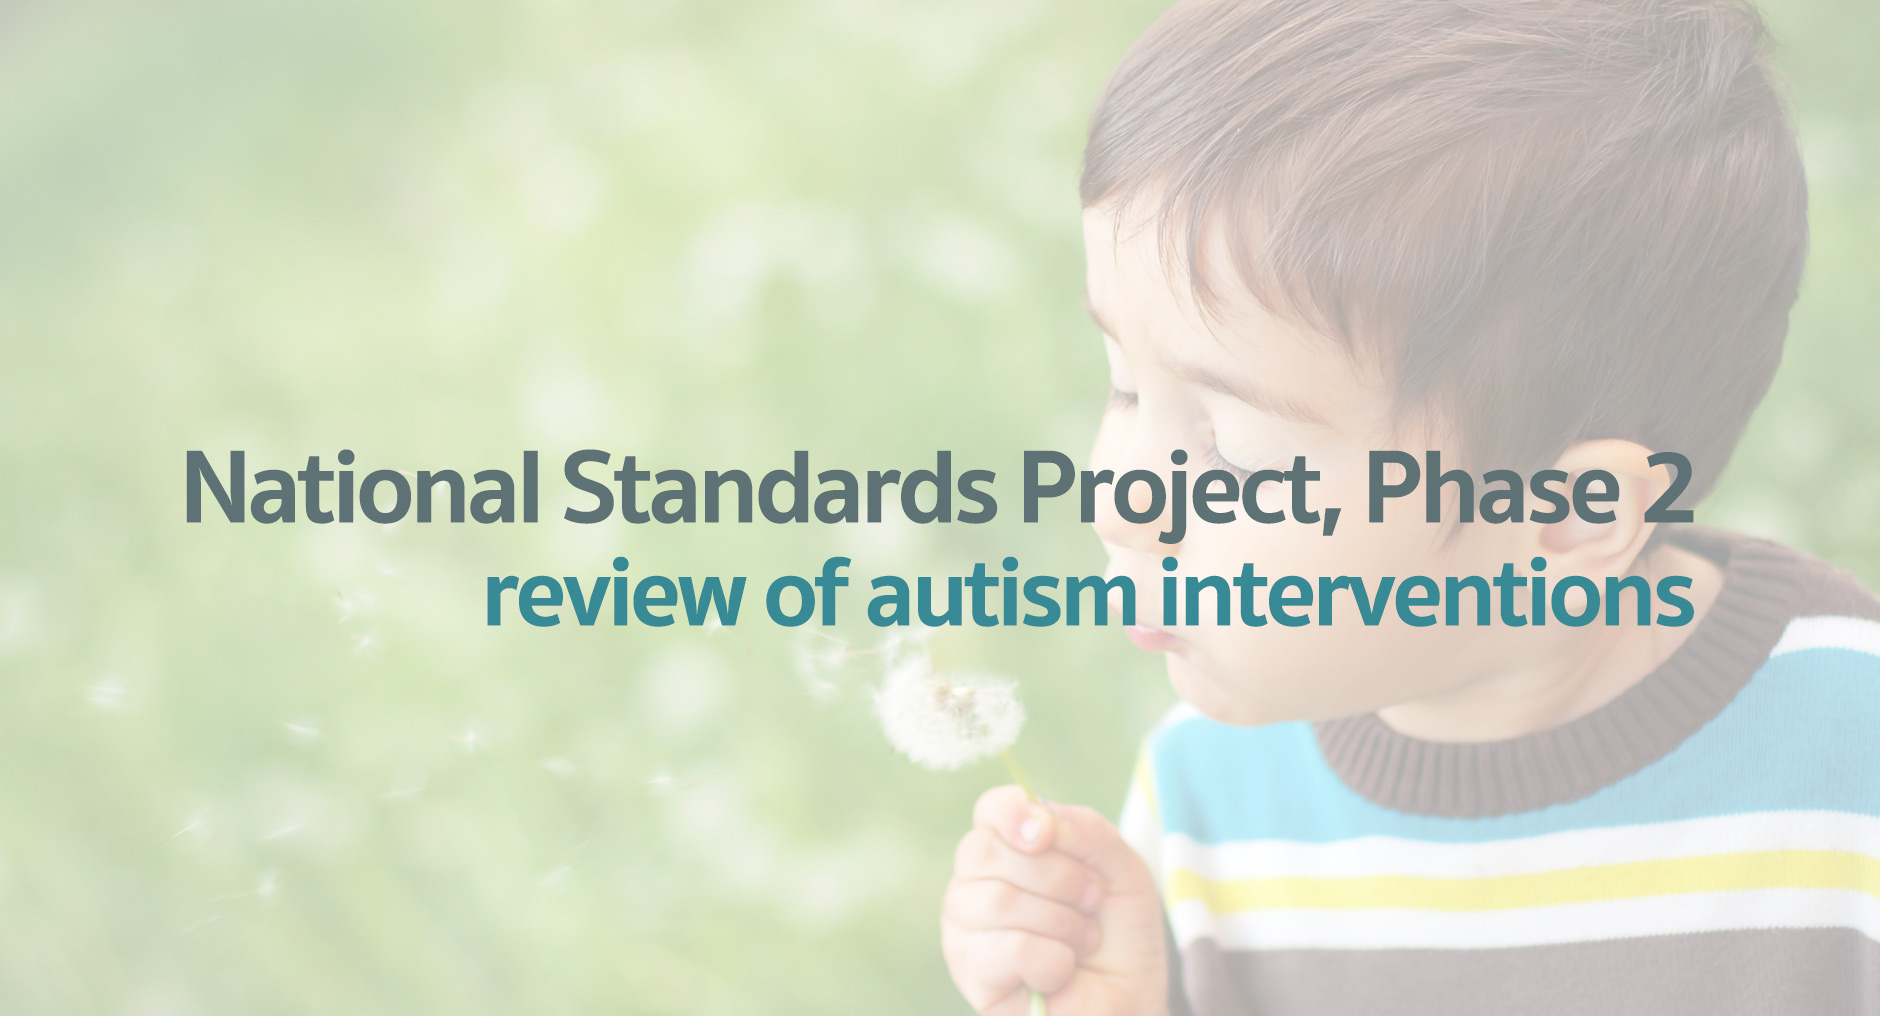 National Standards Project, Phase 2 review of autism interventions